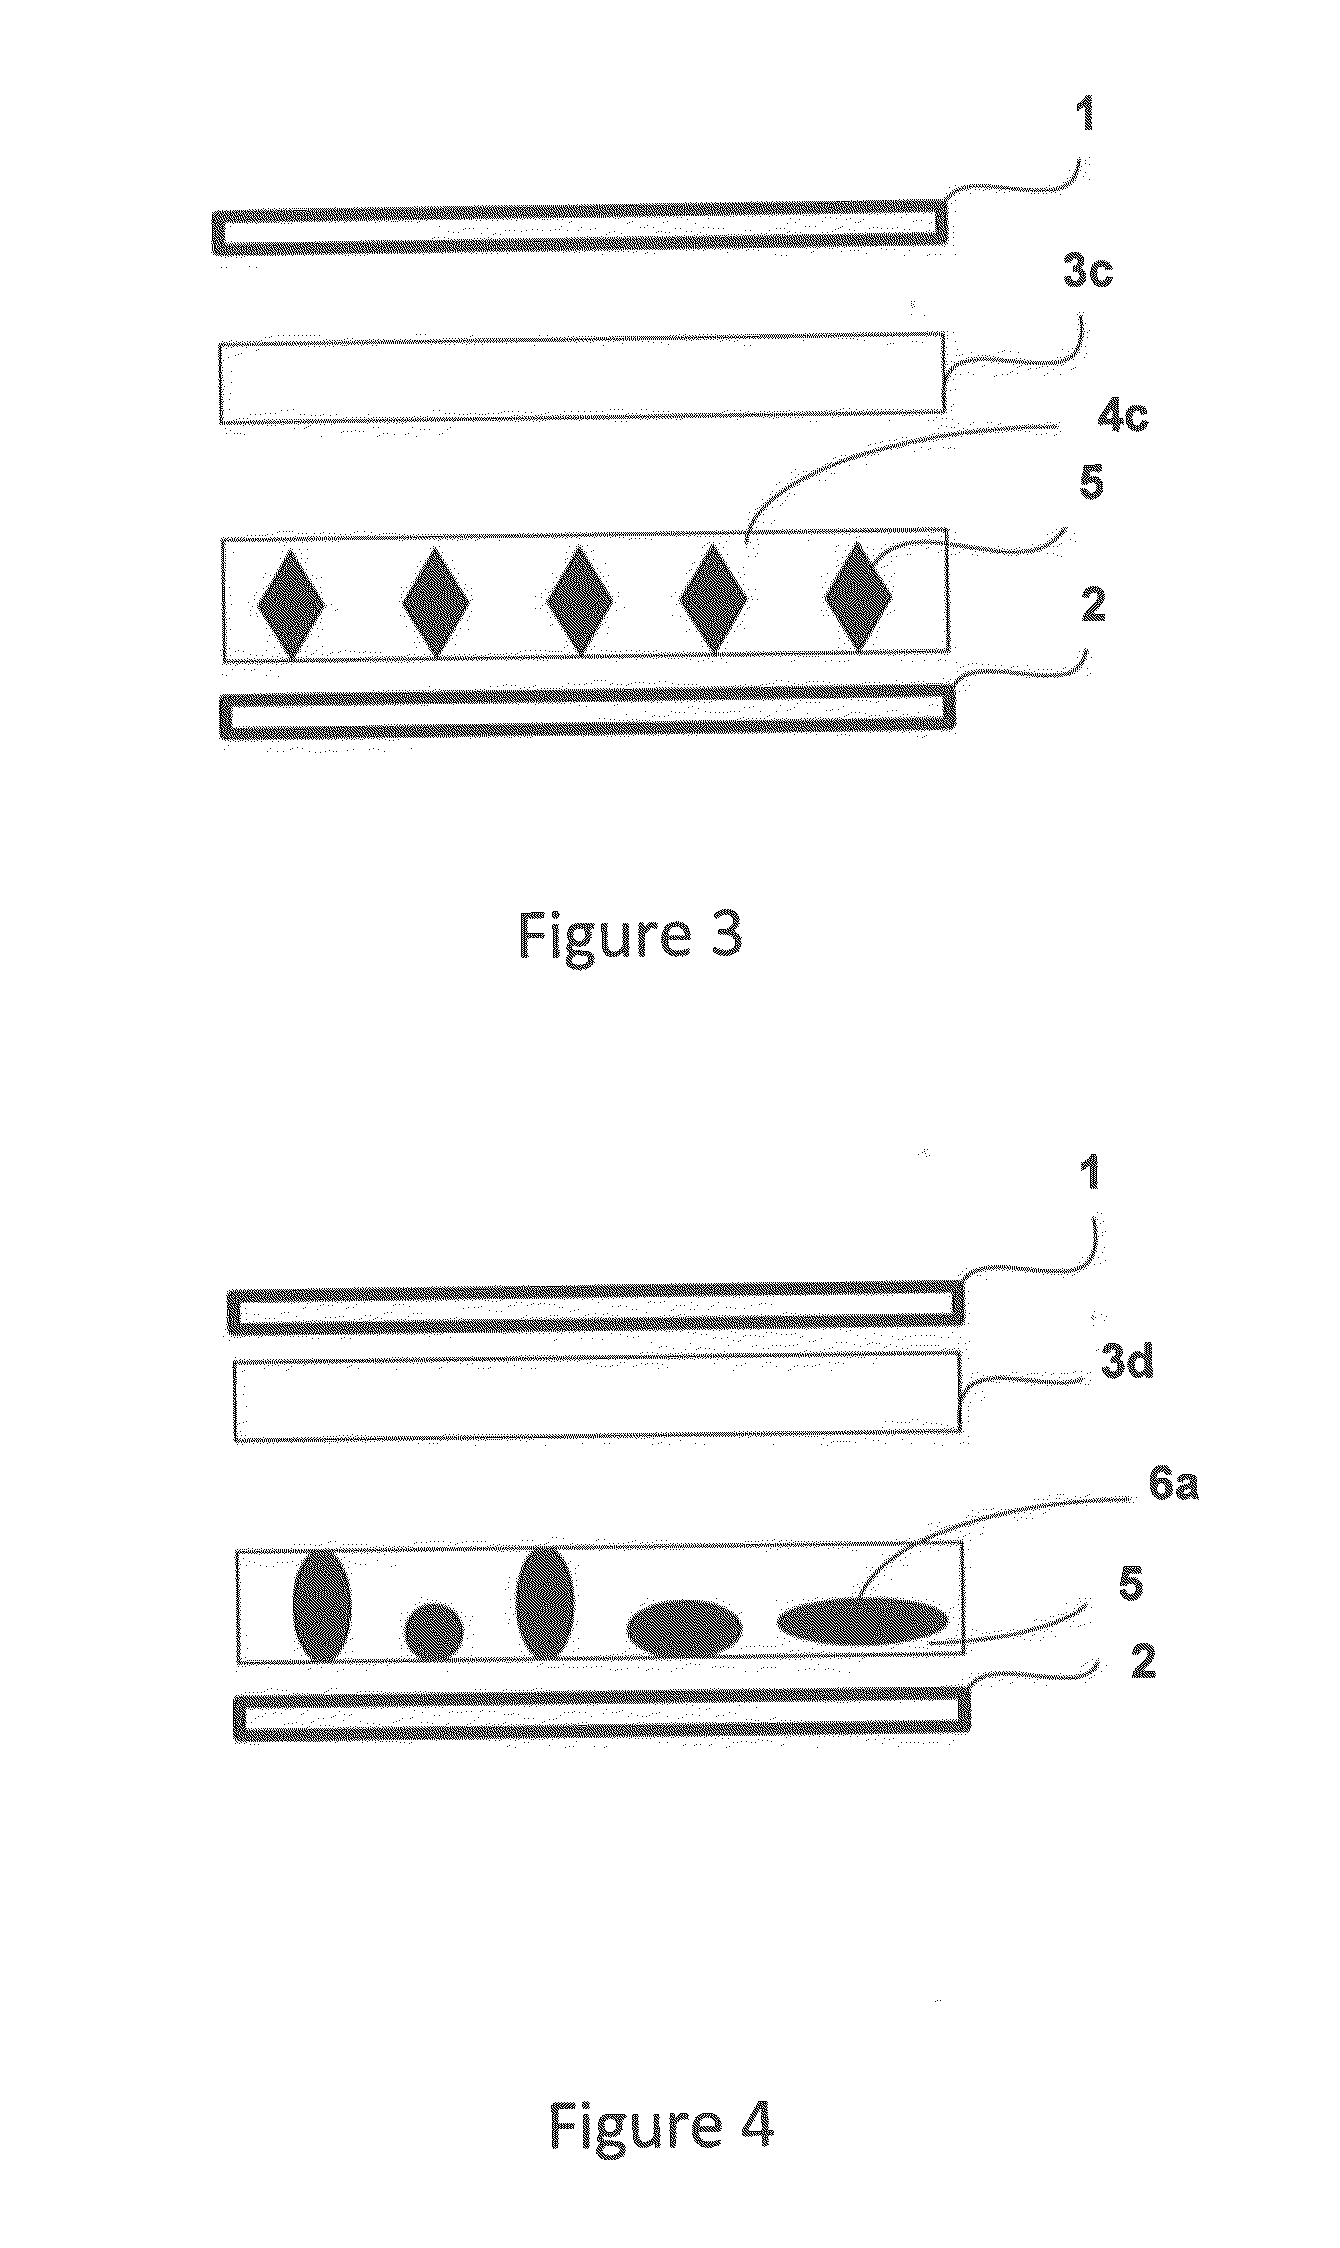 Odour control material, method for preparation of an odour control material and an absorbent product comprising the odour control material